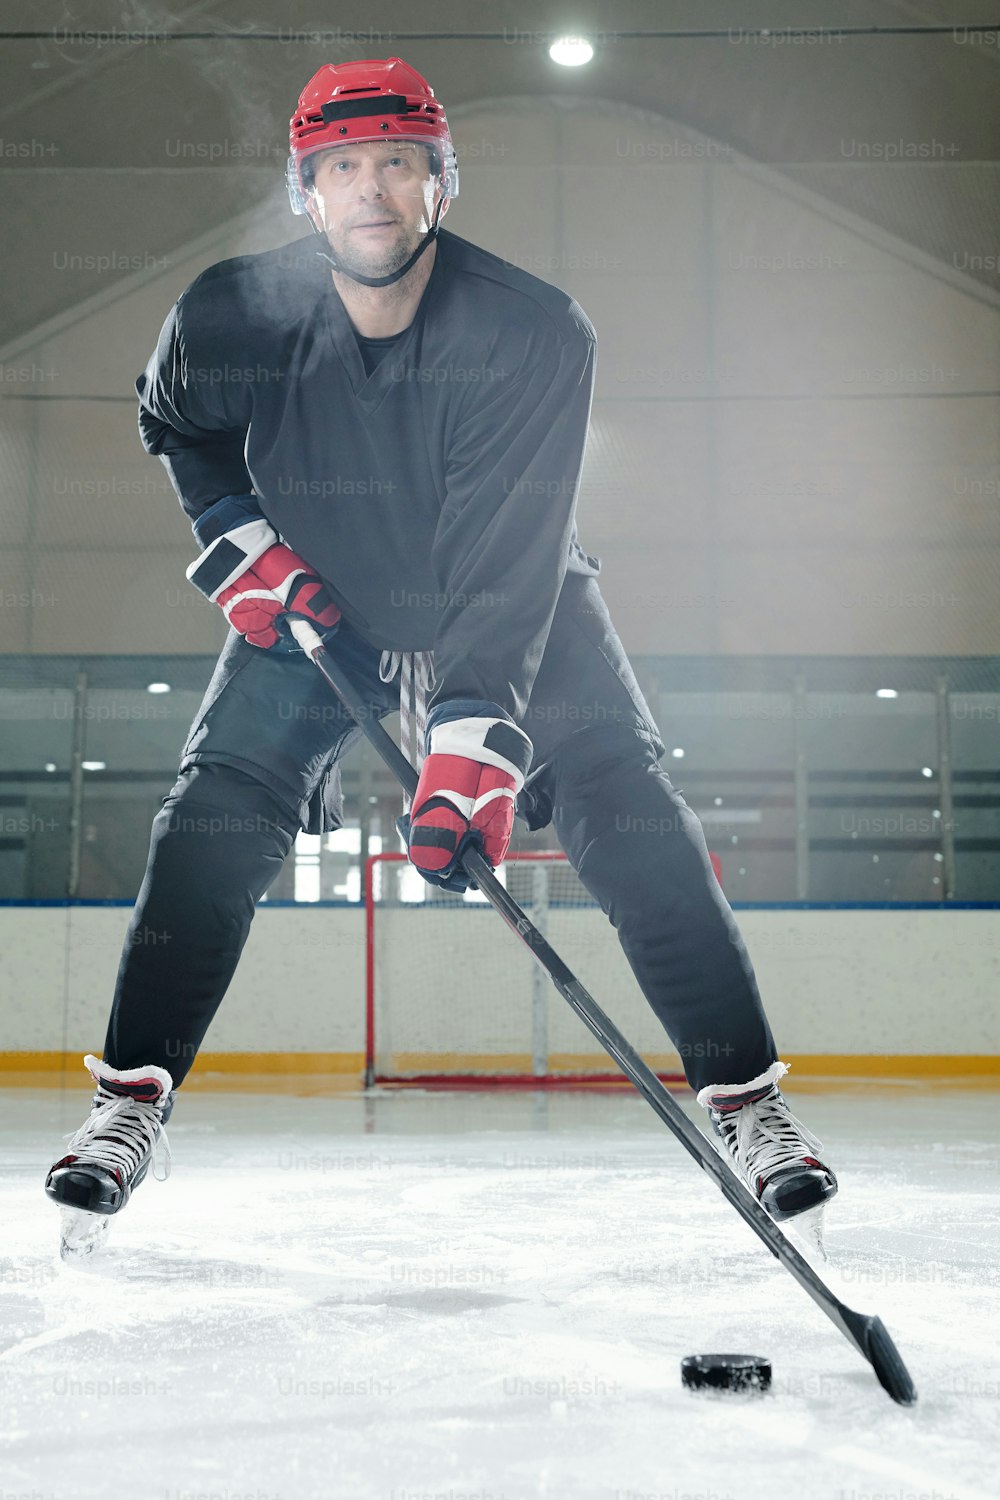 Mature male hockey player in sports uniform, protective helmet and gloves moving down rink in front of camera and going to shoot puck